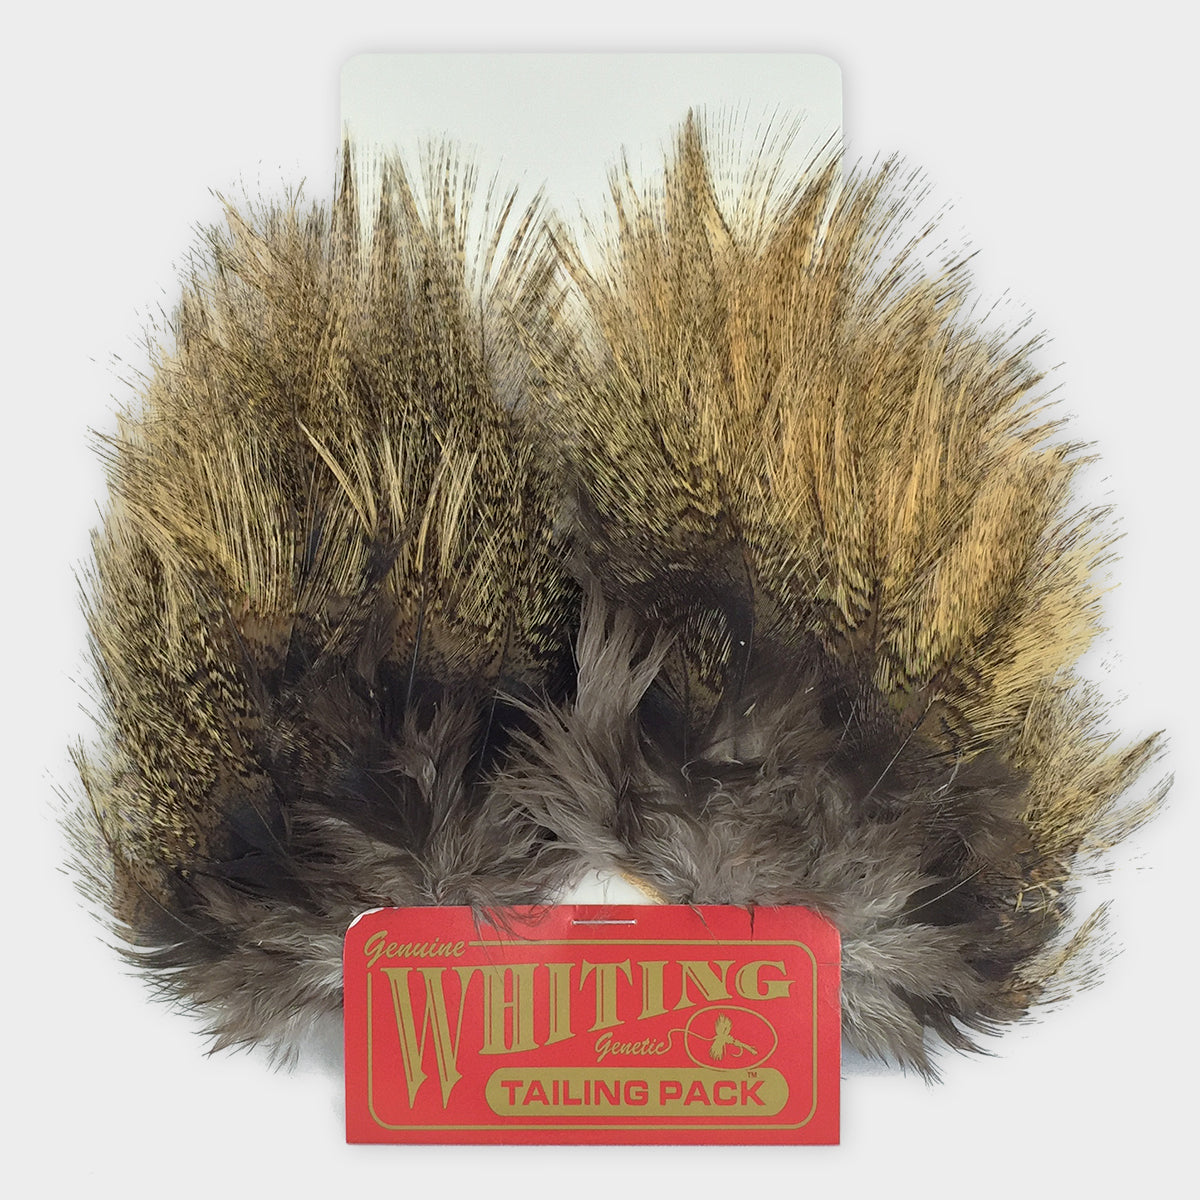 Whiting Farms CDL Tailing Pack (Coq De Leon)